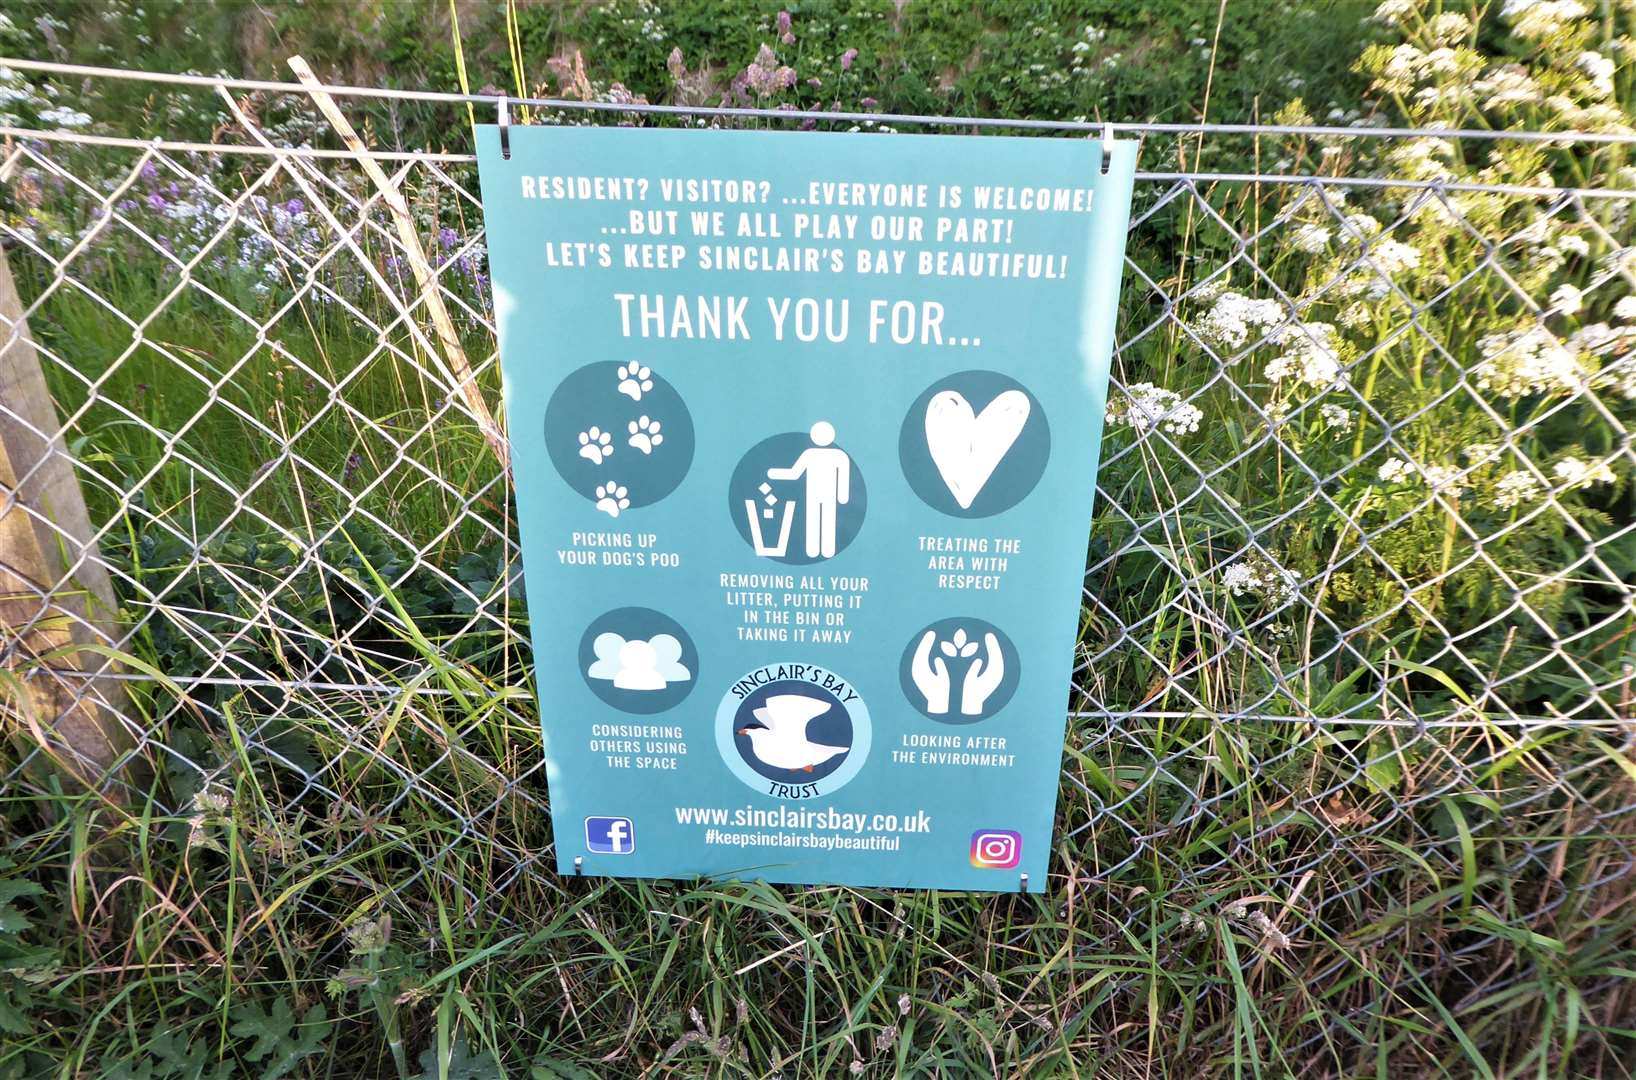 A sign erected by the trust near Reiss beach with information to encourage responsible use of, and respect for, public spaces in the Sinclair’s Bay community.